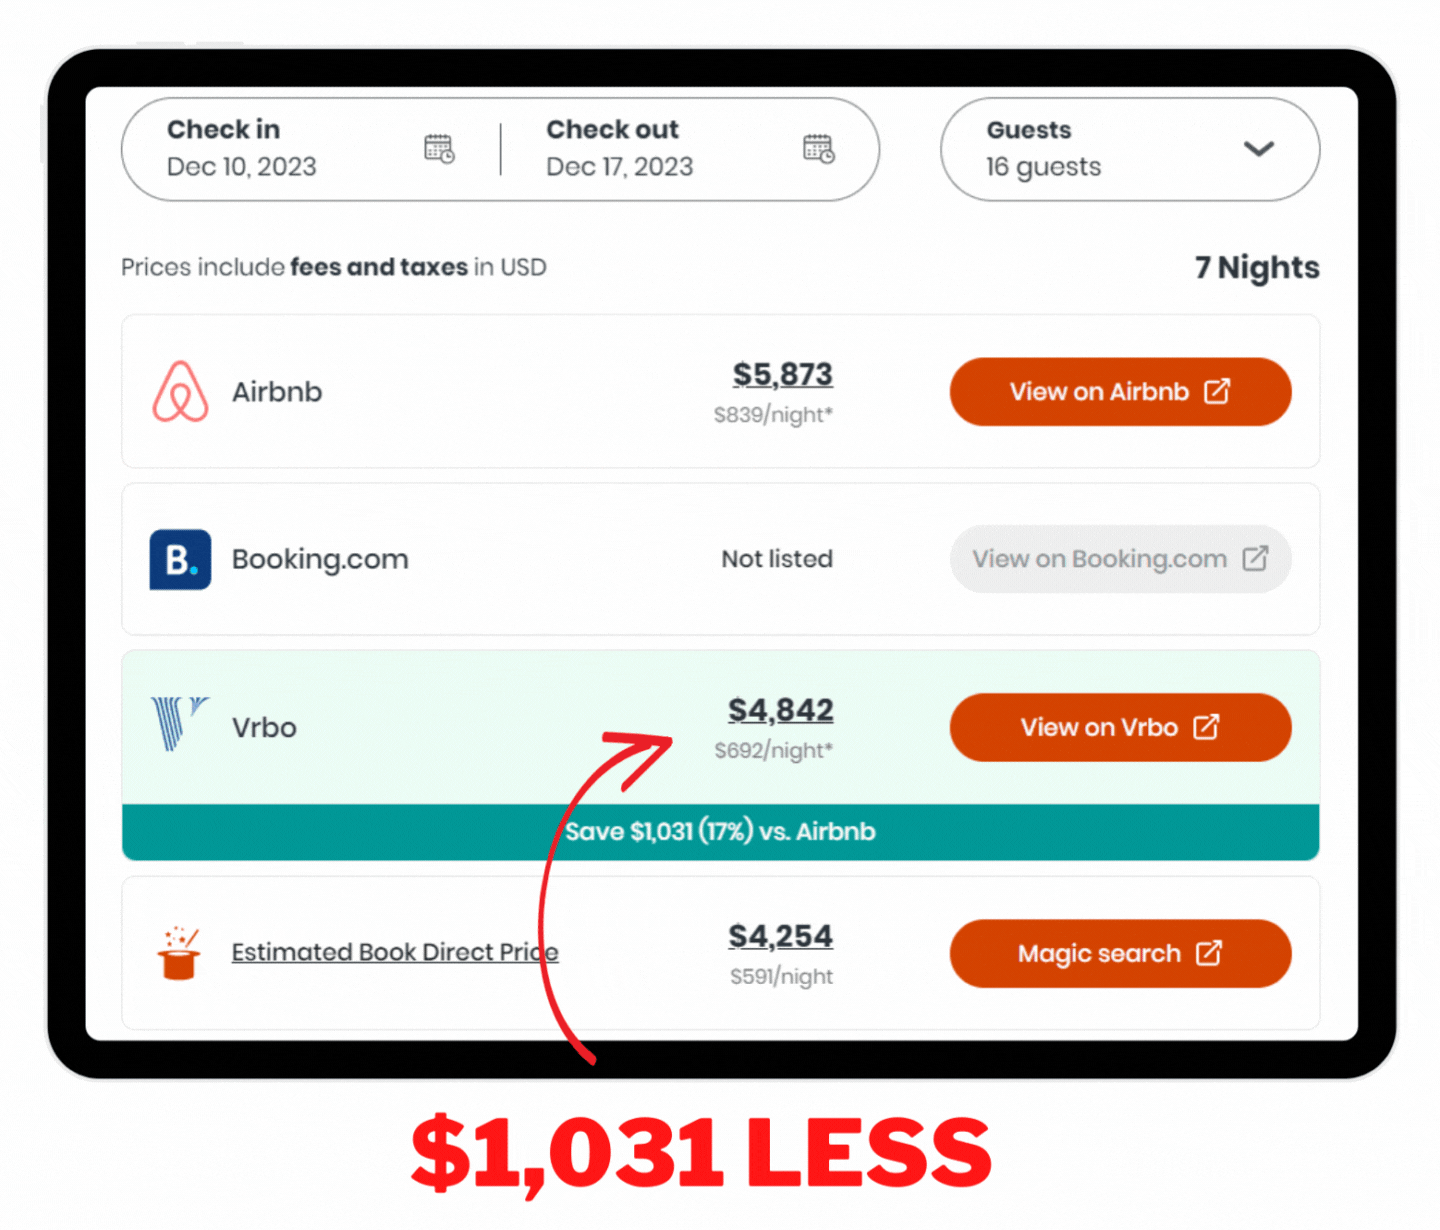 VRBO are $1031 less than Airbnb